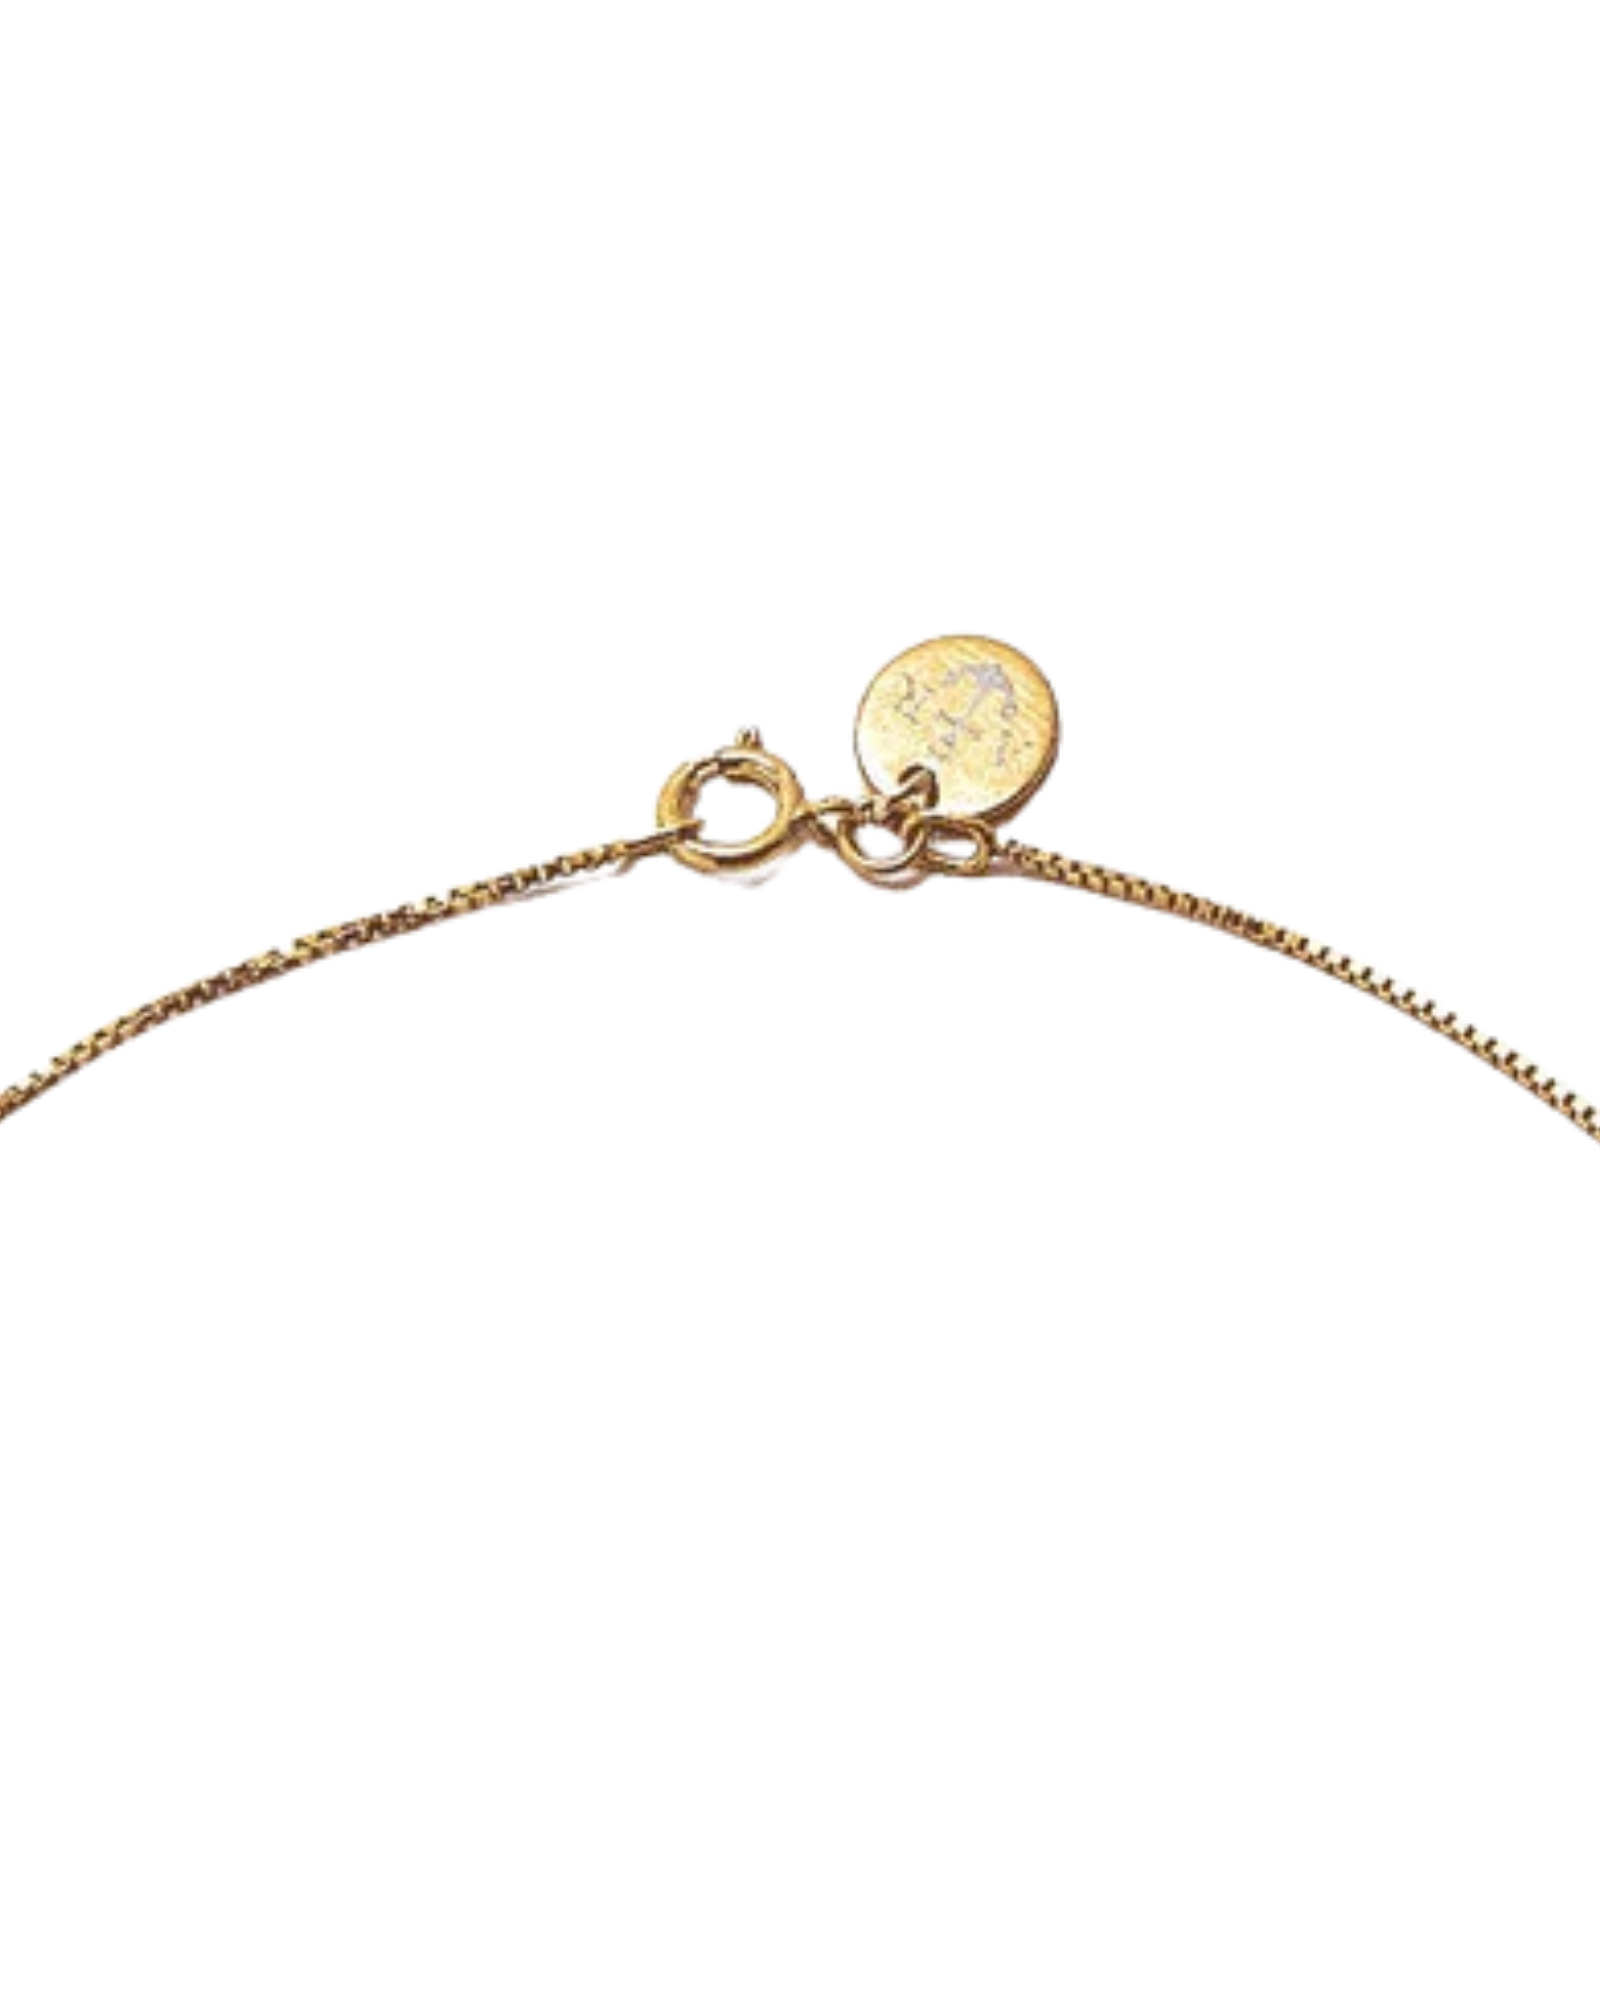 Close up view of the gold spring ring clasp